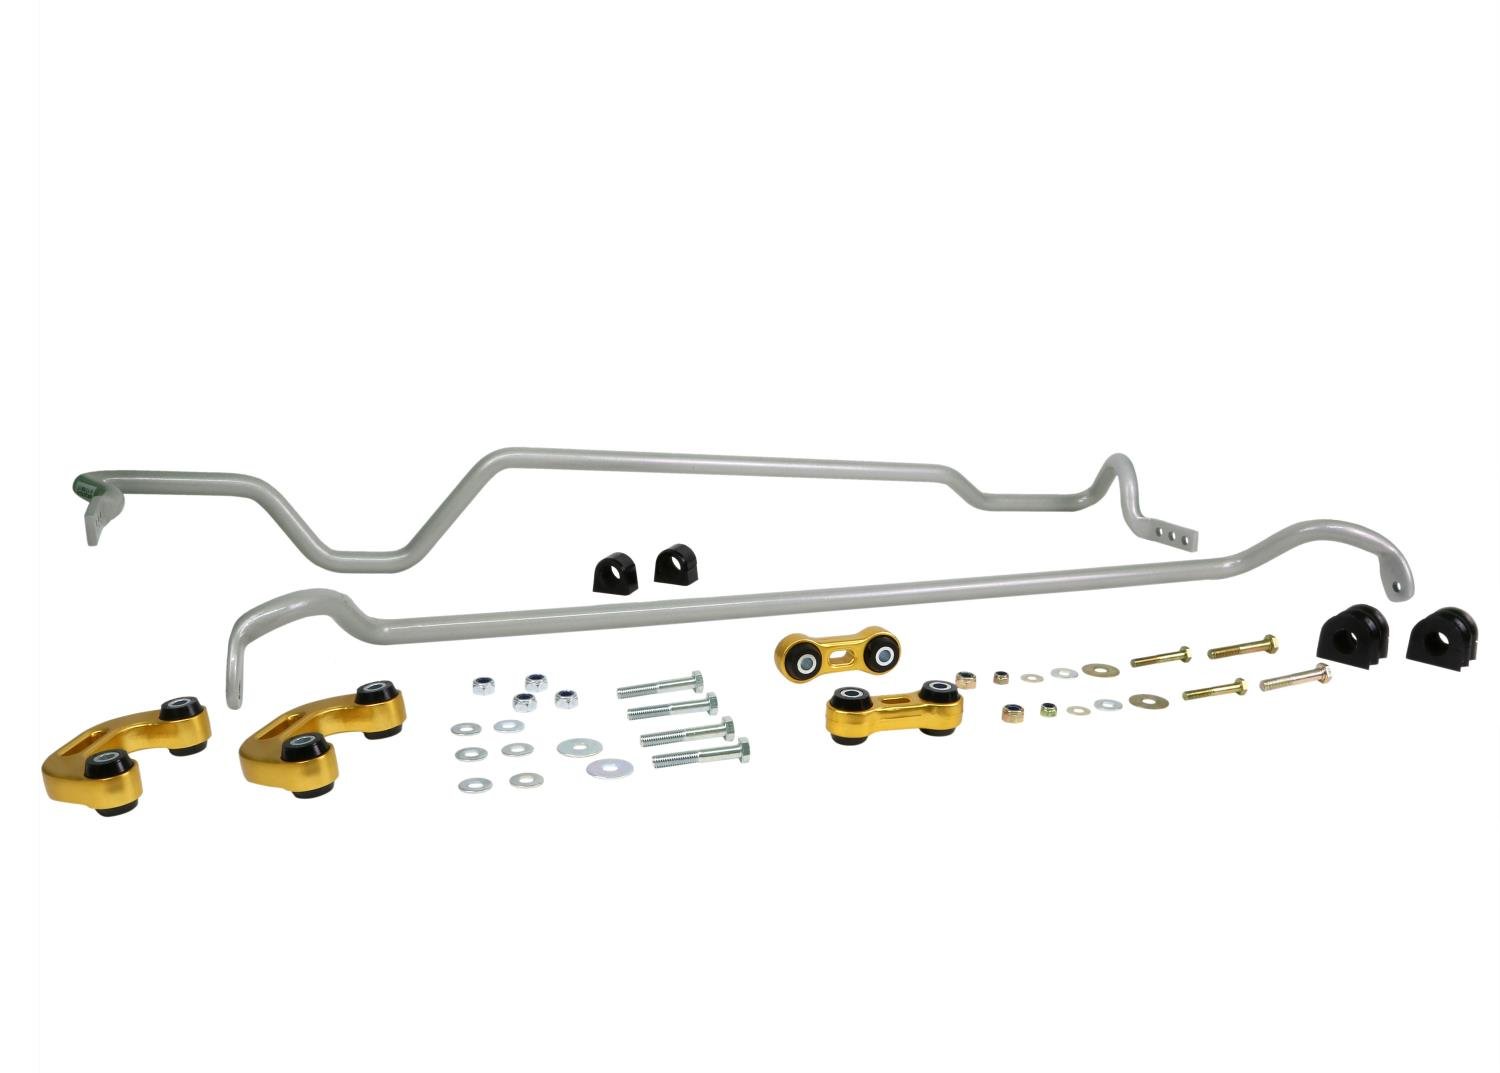 BSK002 Front And Rear Sway Bar Kit for 2000-2004 Subaru Legacy GT